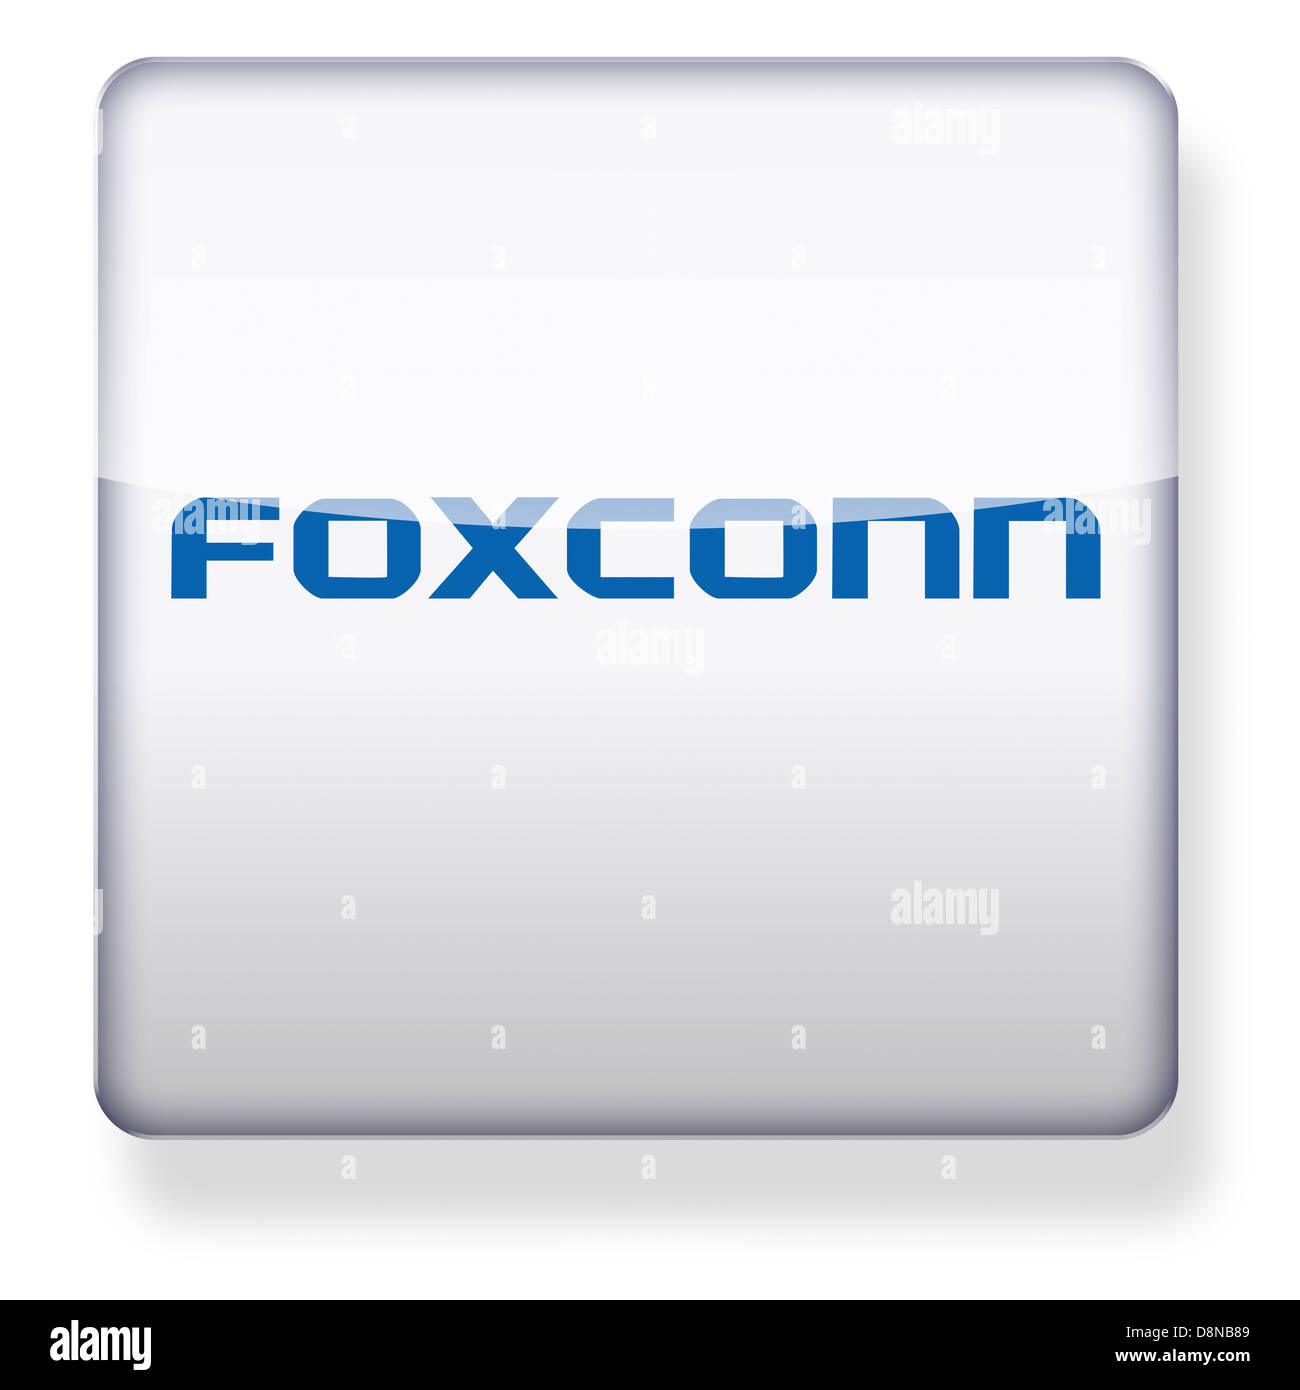 Foxconn logo as an app icon. Clipping path included. Stock Photo